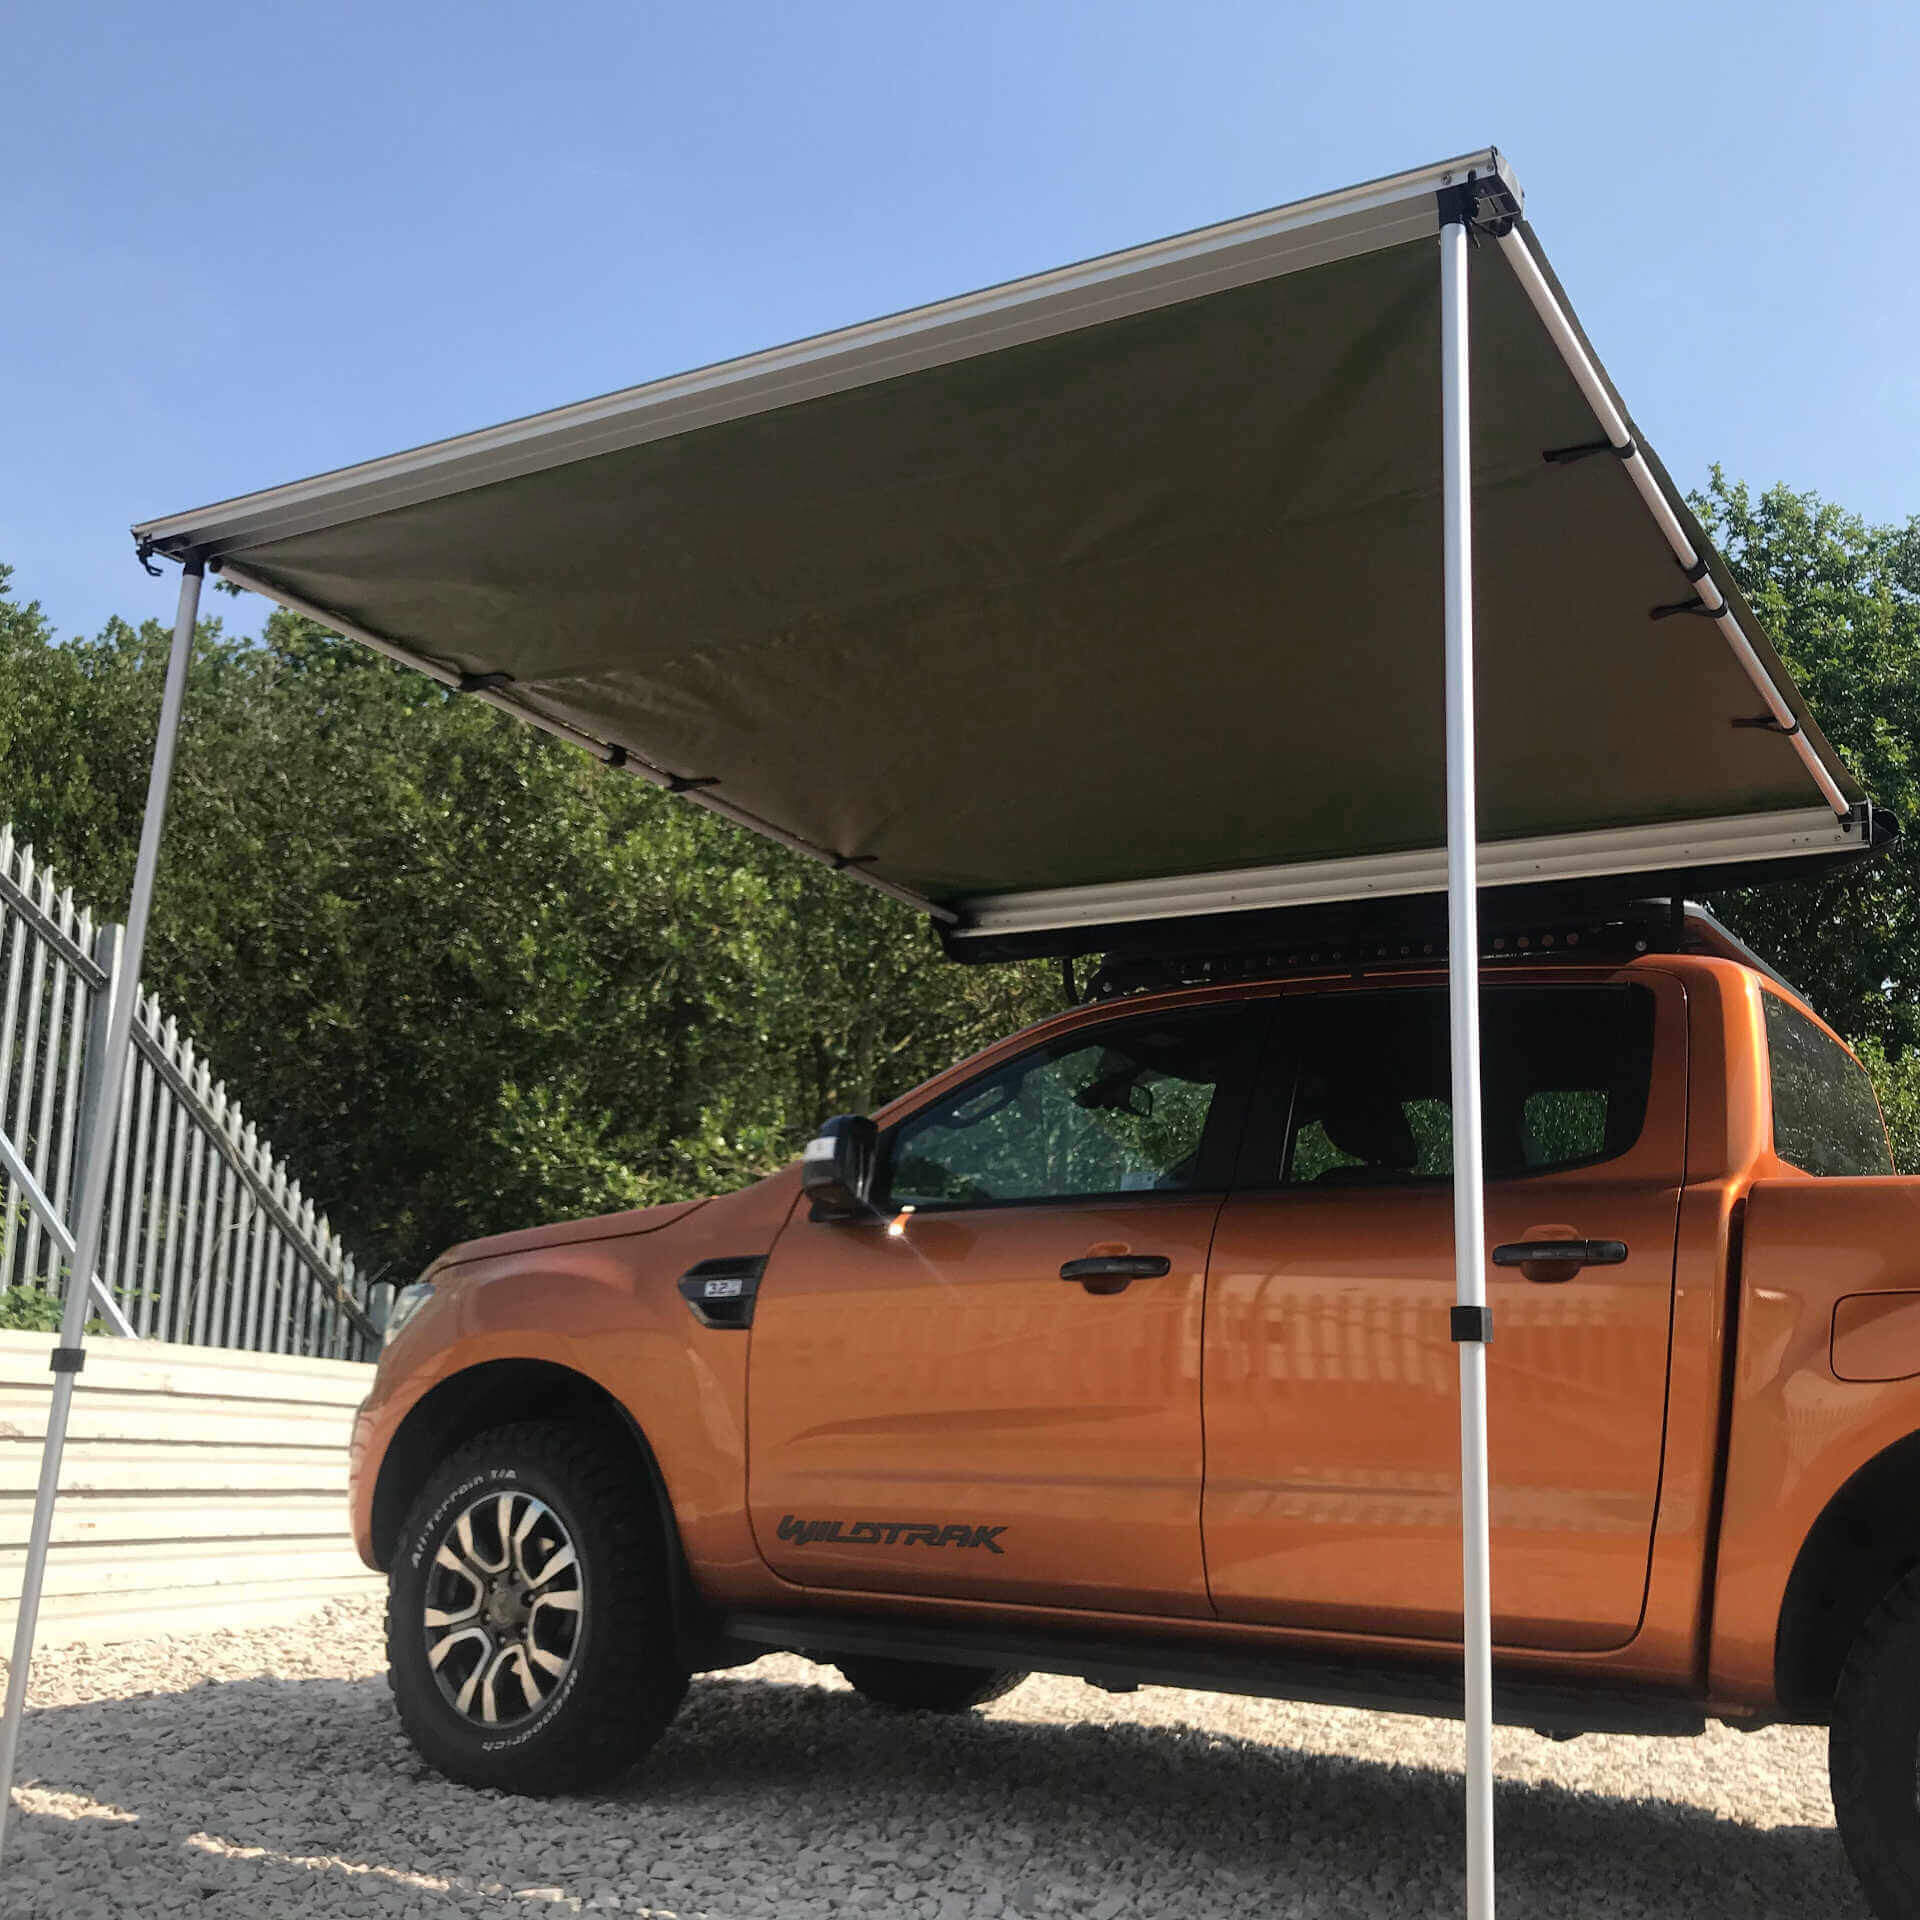 Expedition Pull-out Vehicle Side Awning - AWN-250X250-GREEN - sold by Direct4x4